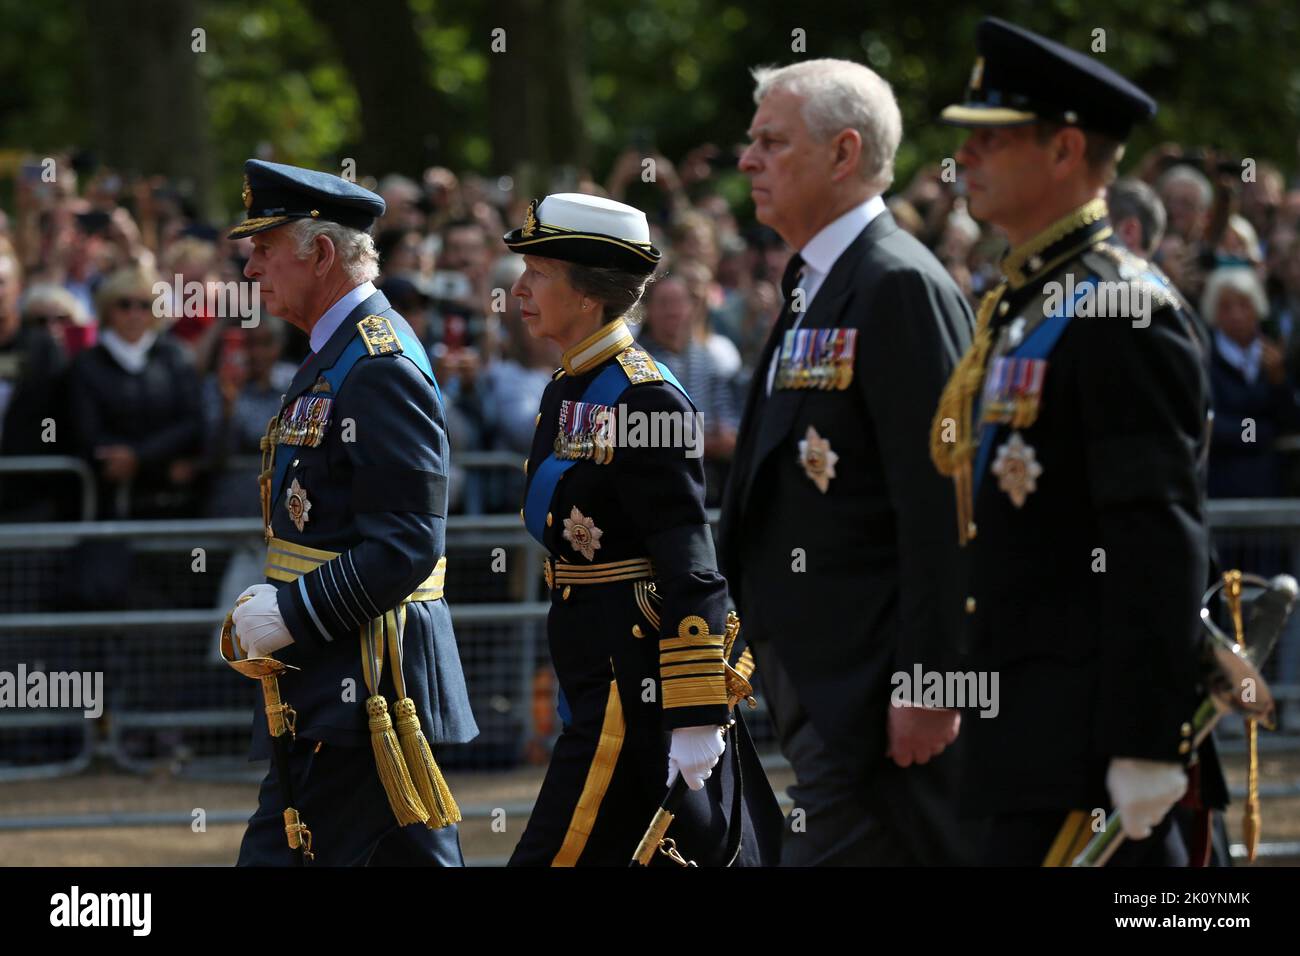 (left to right) King Charles III, the Princess Royal, the Duke of York and the Earl of Wessex walk behind the coffin of Queen Elizabeth II during the ceremonial procession from Buckingham Palace to Westminster Hall, London, where it will lie in state ahead of her funeral on Monday. Picture date: Wednesday September 14, 2022. Stock Photo